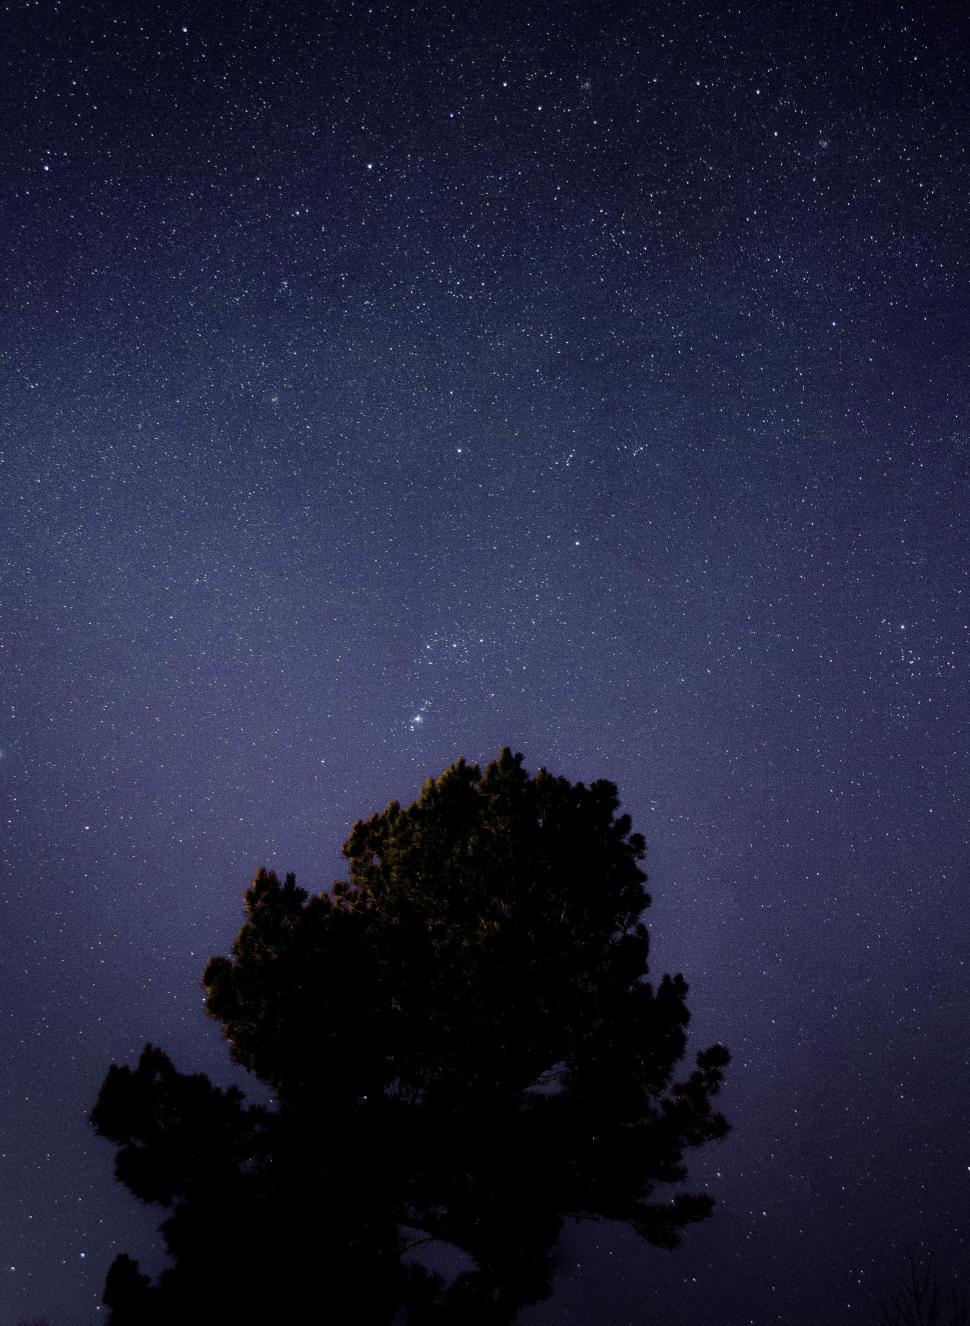 Free Image of Star-Filled Night Sky and Tree 